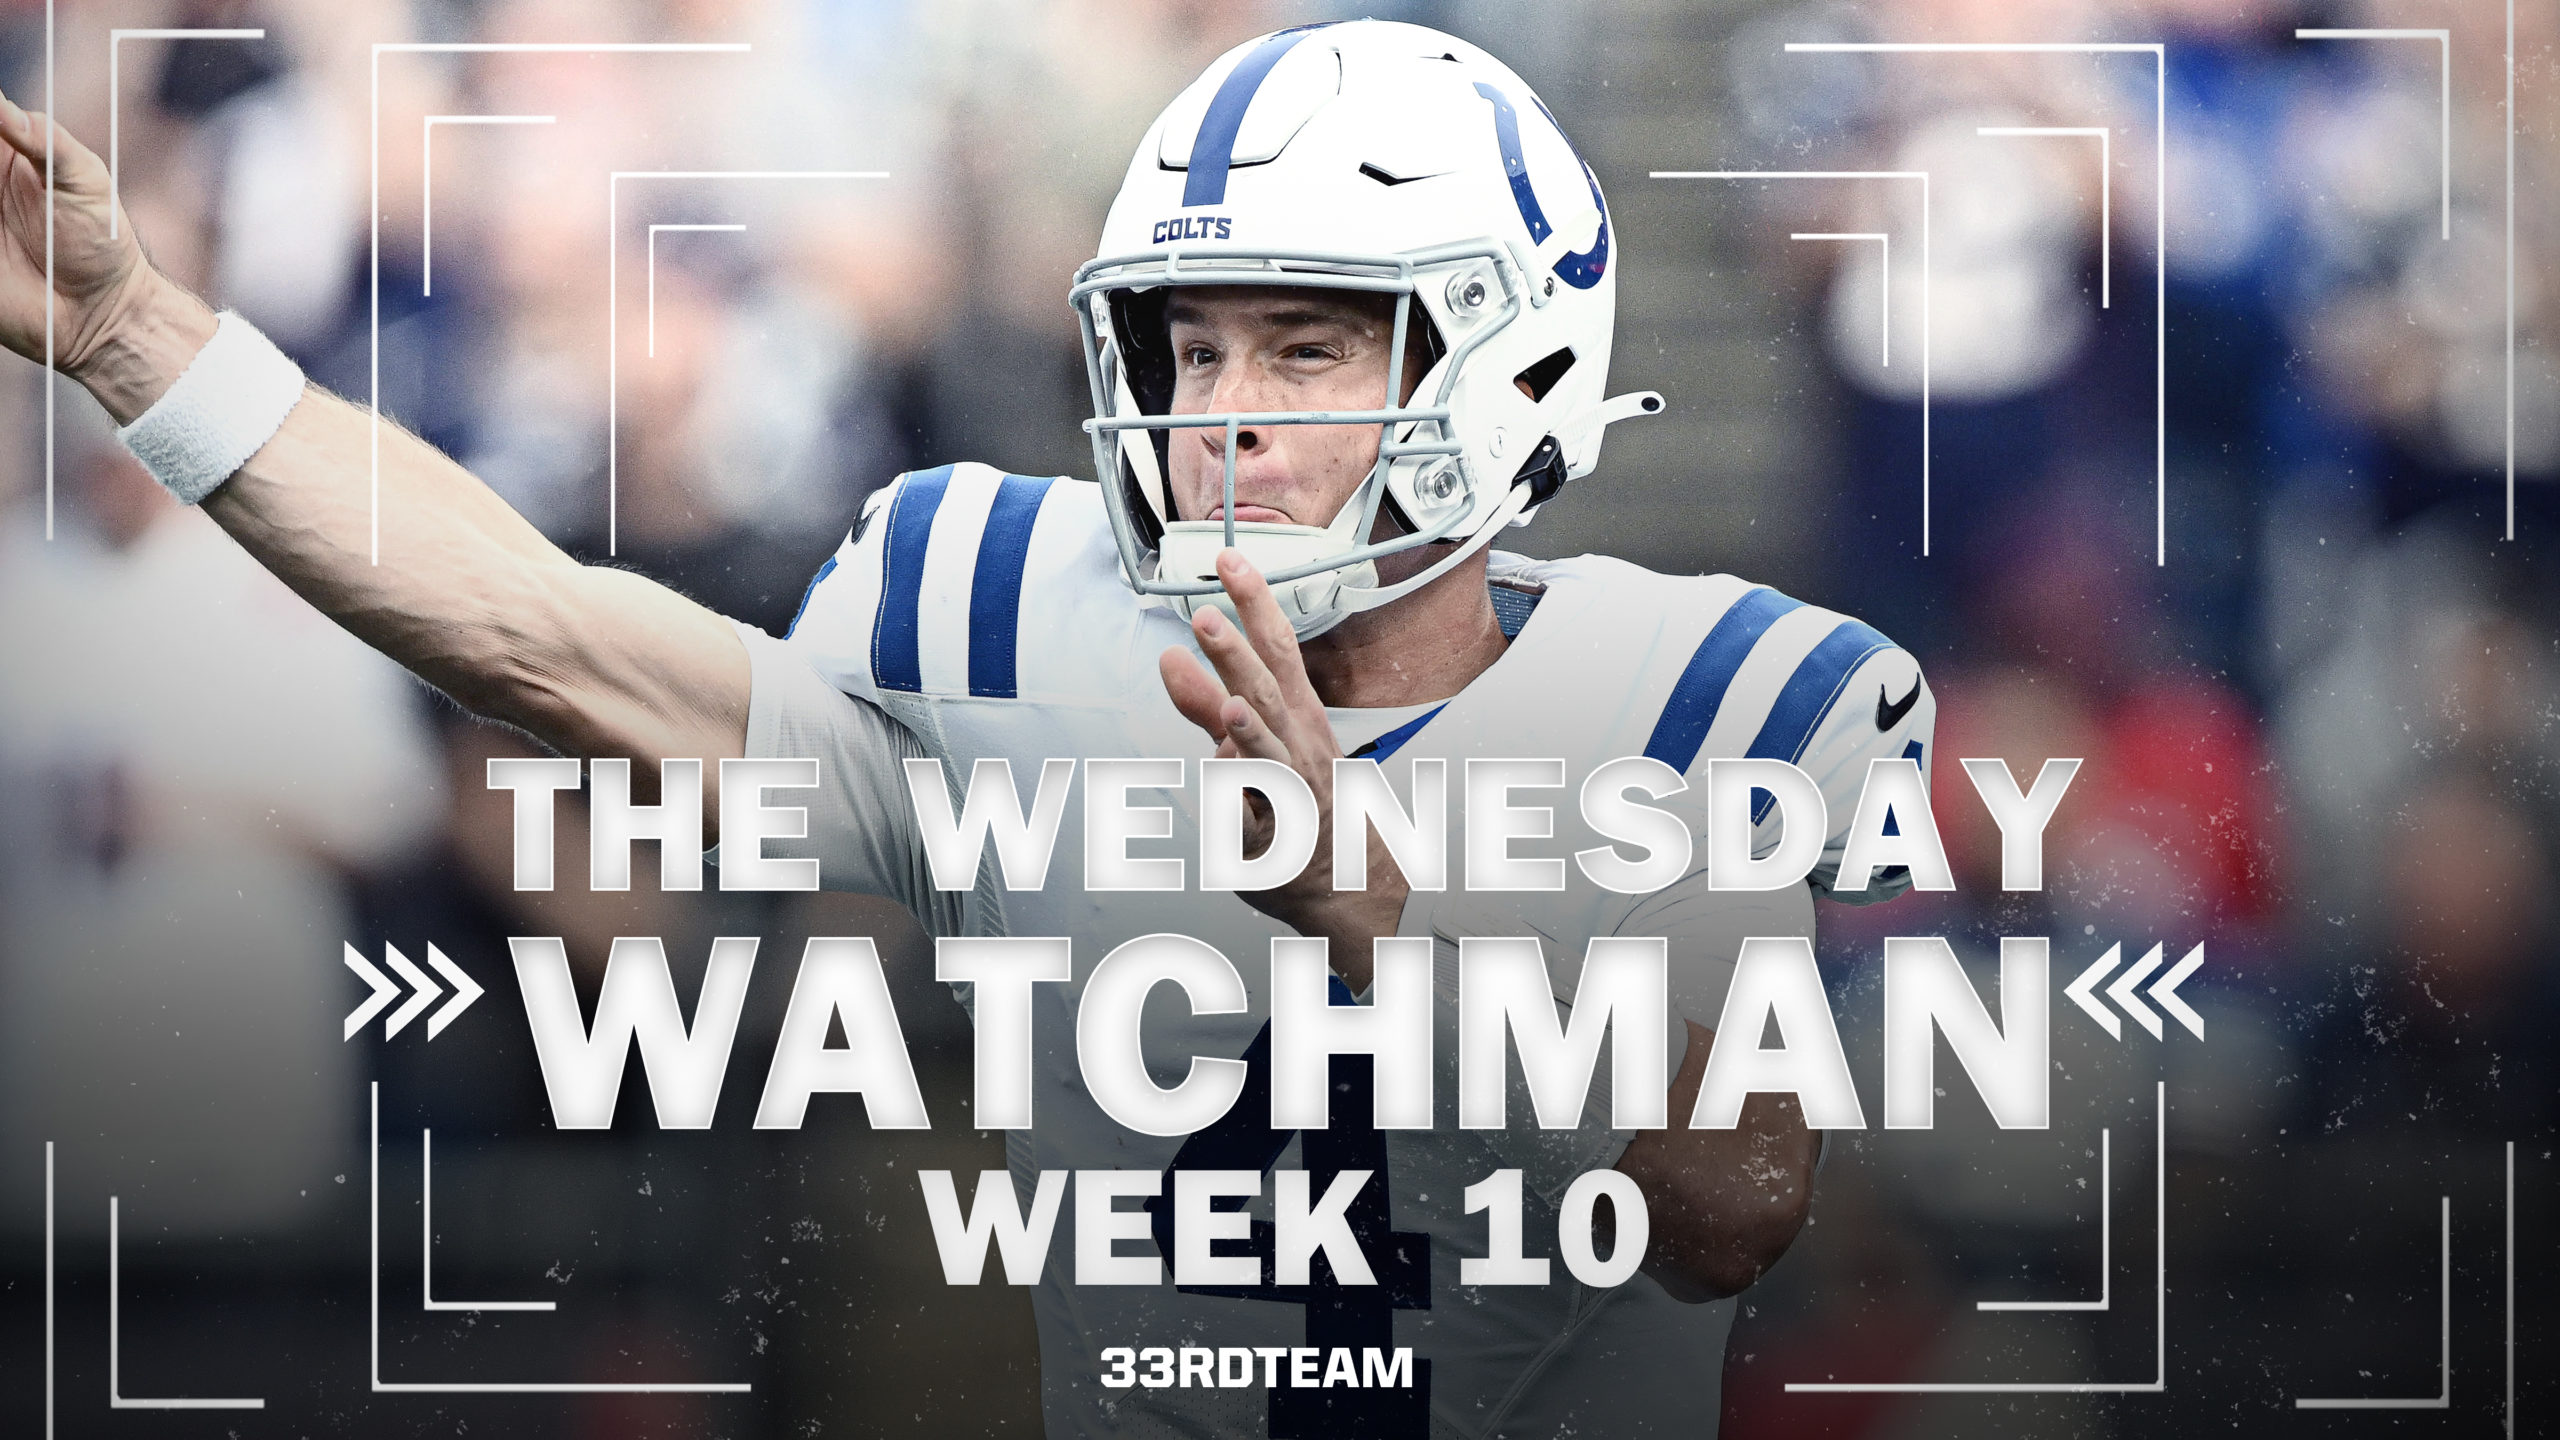 The Wednesday Watchman: NFL Week 10 Betting, DFS and Fantasy Information to Know